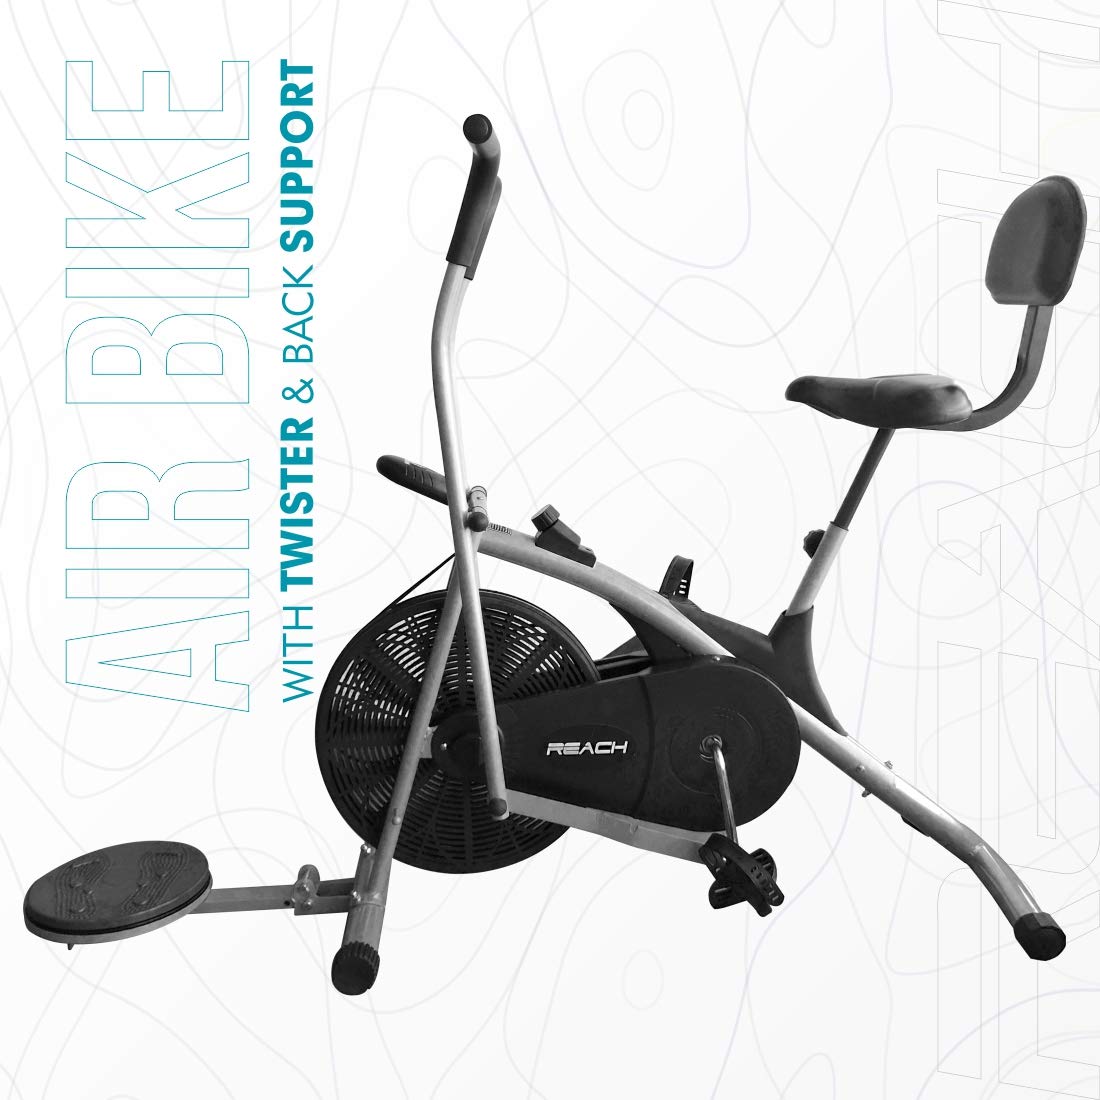 Reach Air Bike AB-100 Fitness Gym Cycle with Back Support Seat & Twister | Moving & Stationary Handle Adjustment Makes it Best Exercise Cycle for Home use